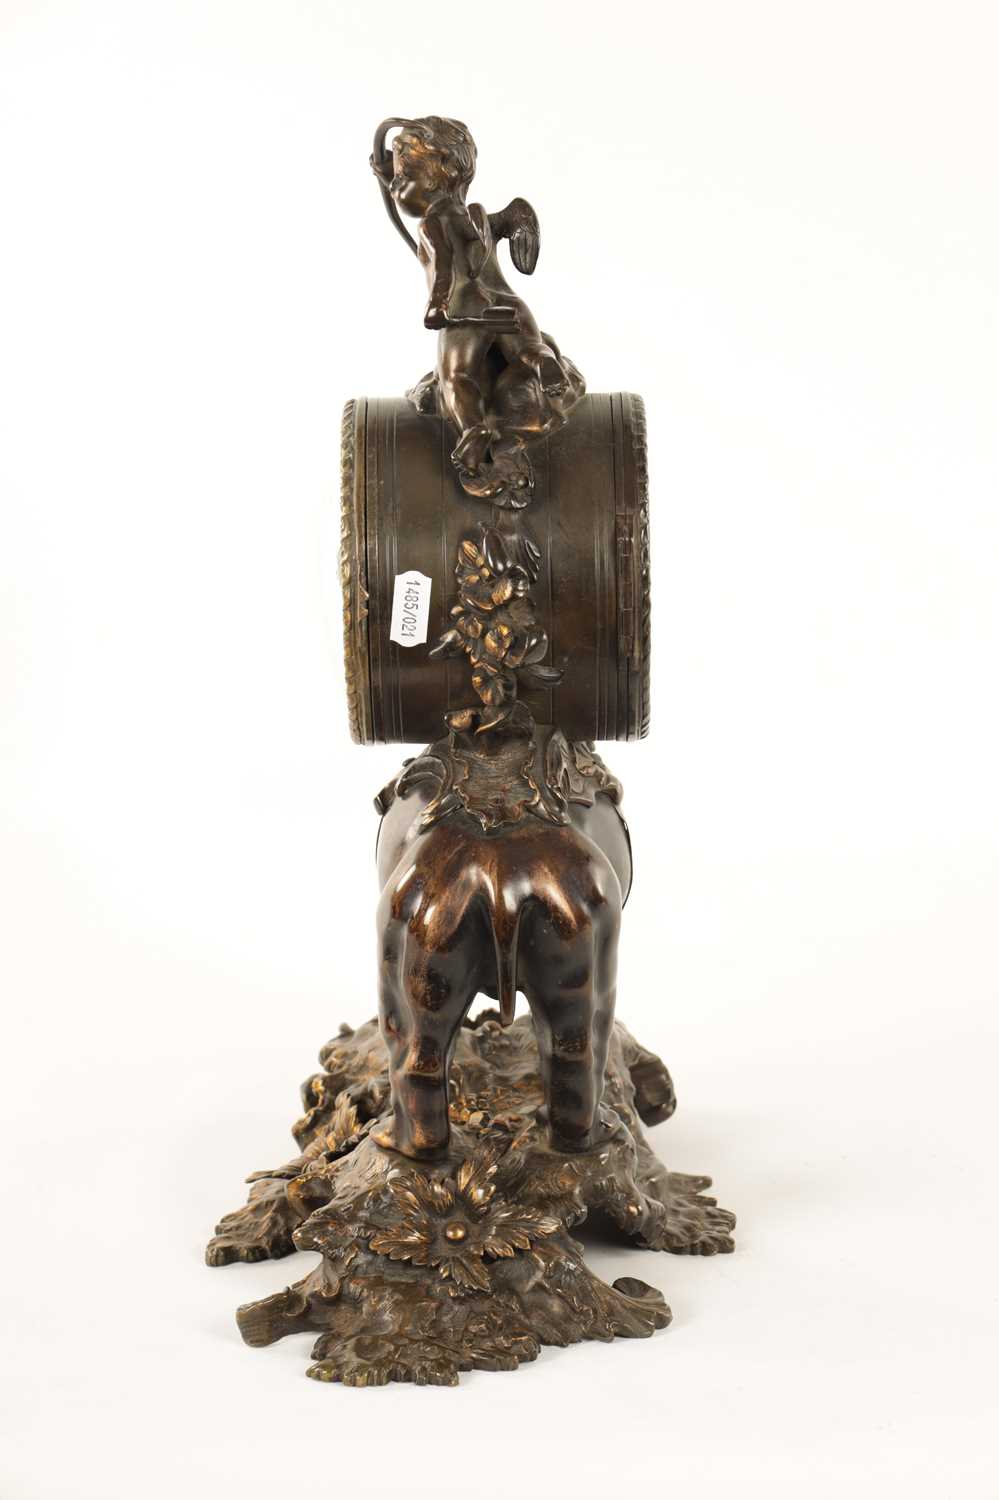 THUILLIER, A PARIS. A LATE 19TH CENTURY FRENCH PATINATED BRONZE MANTEL CLOCK - Image 9 of 14